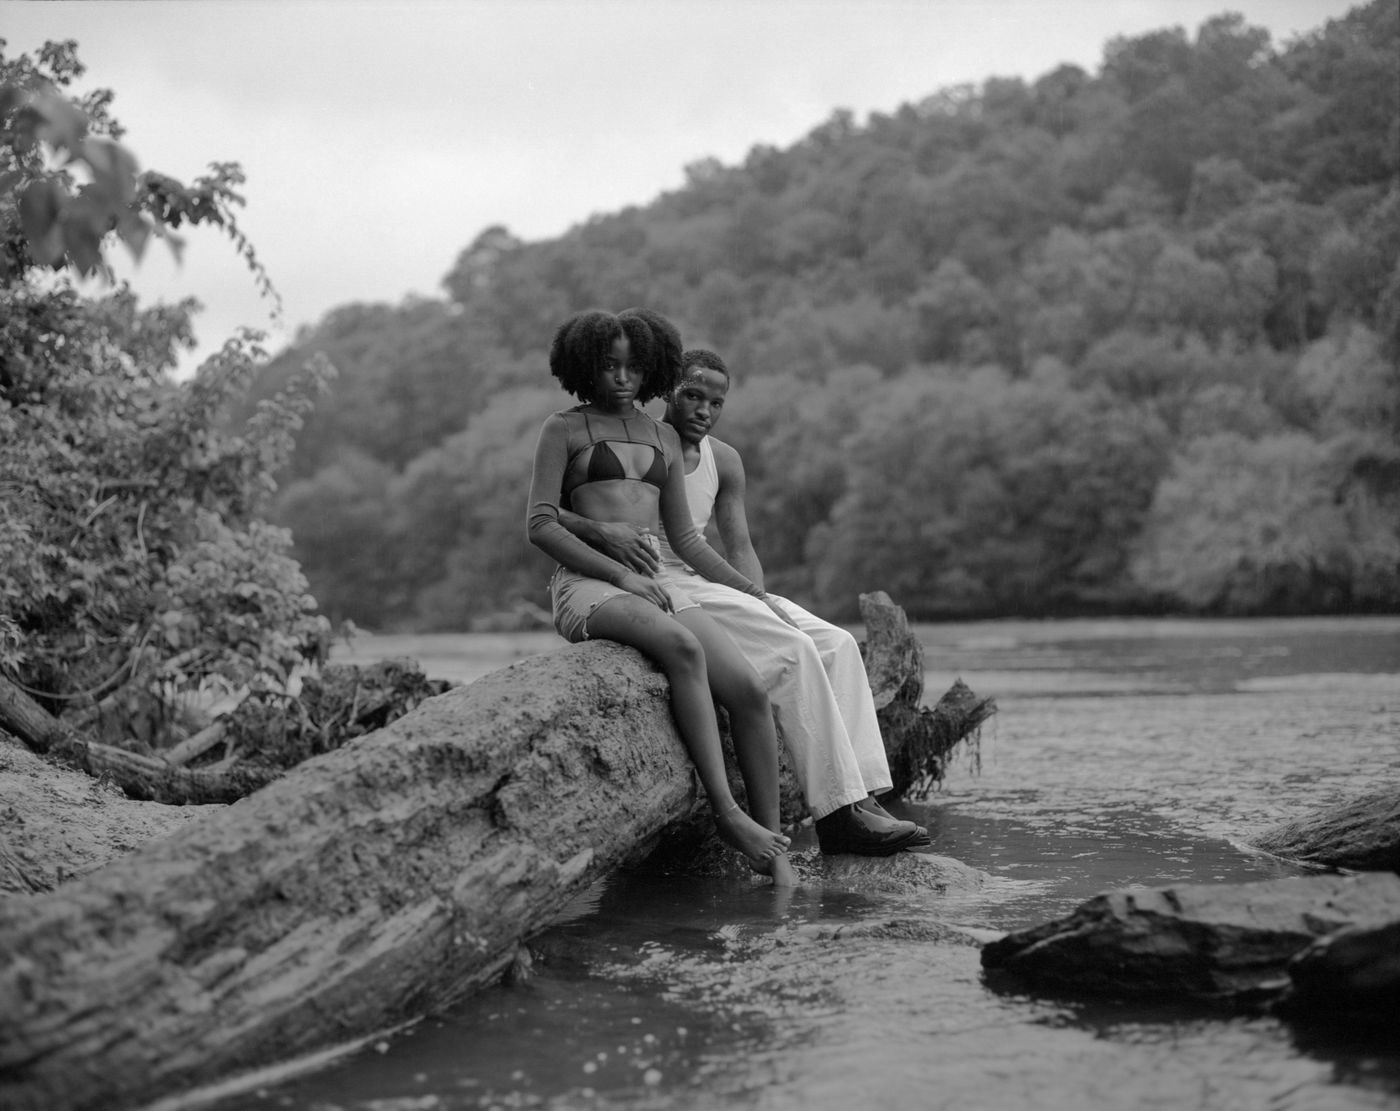 A man and woman sitting on a fallen log by a river with trees in the background